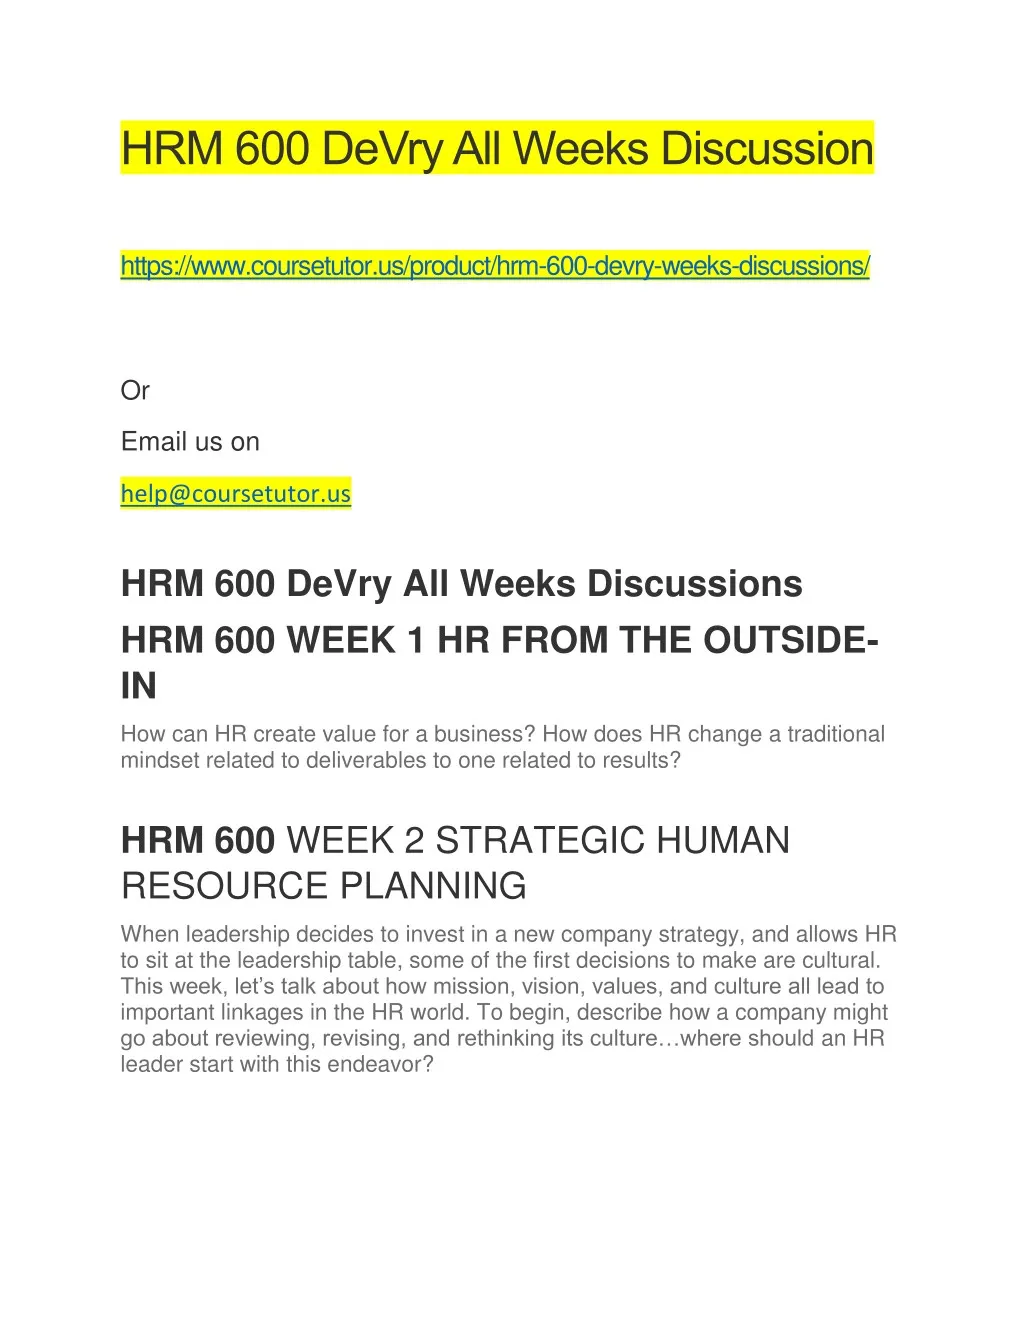 hrm 600 devry all weeks discussion https